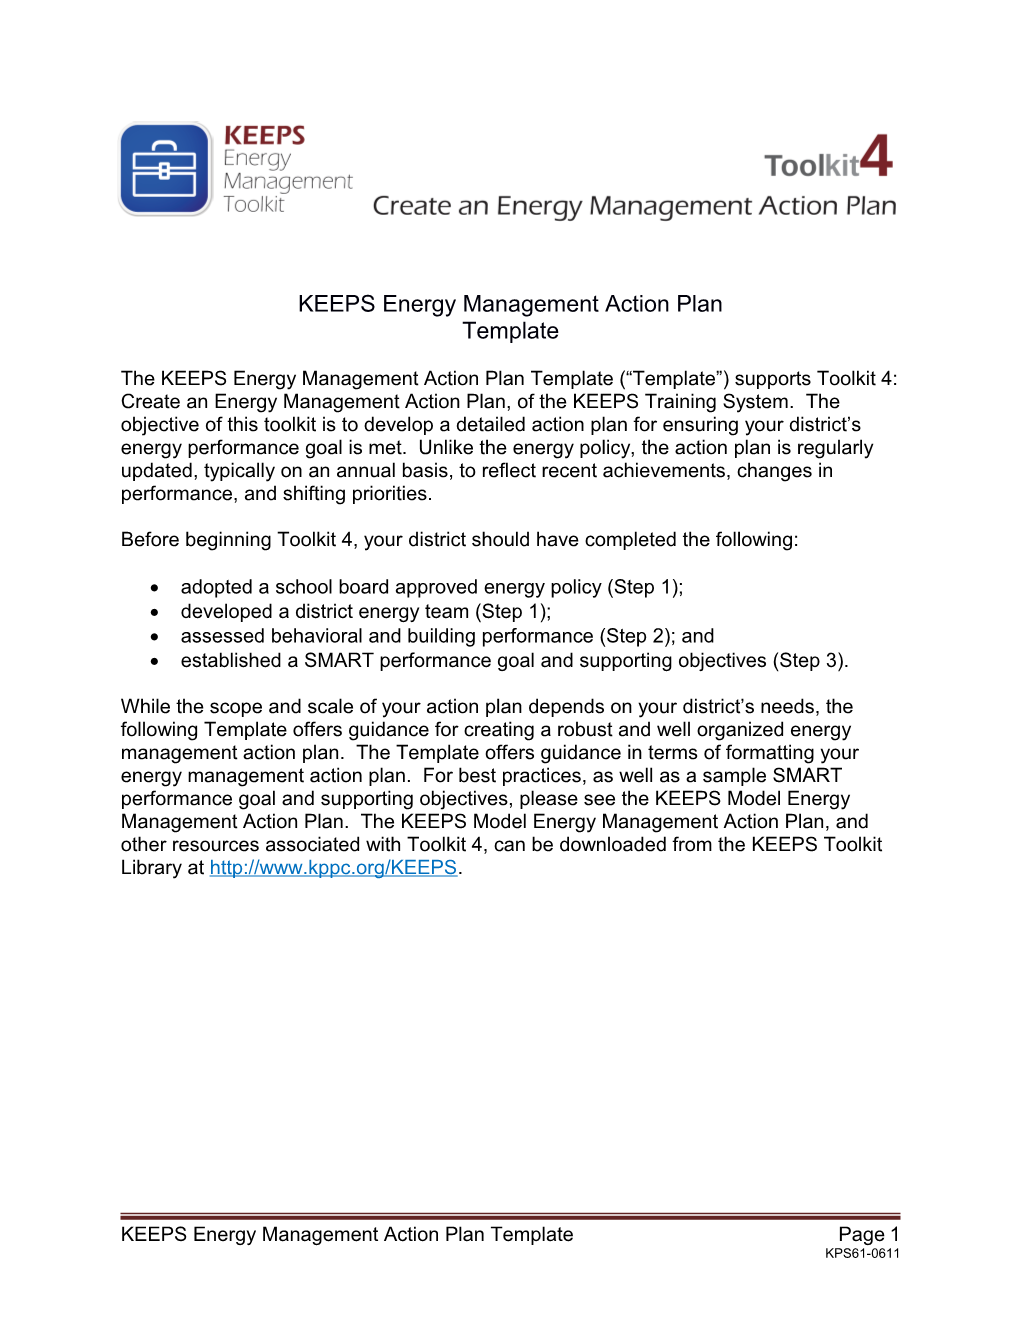 KEEPS Energy Management Action Plan TEMPLATE